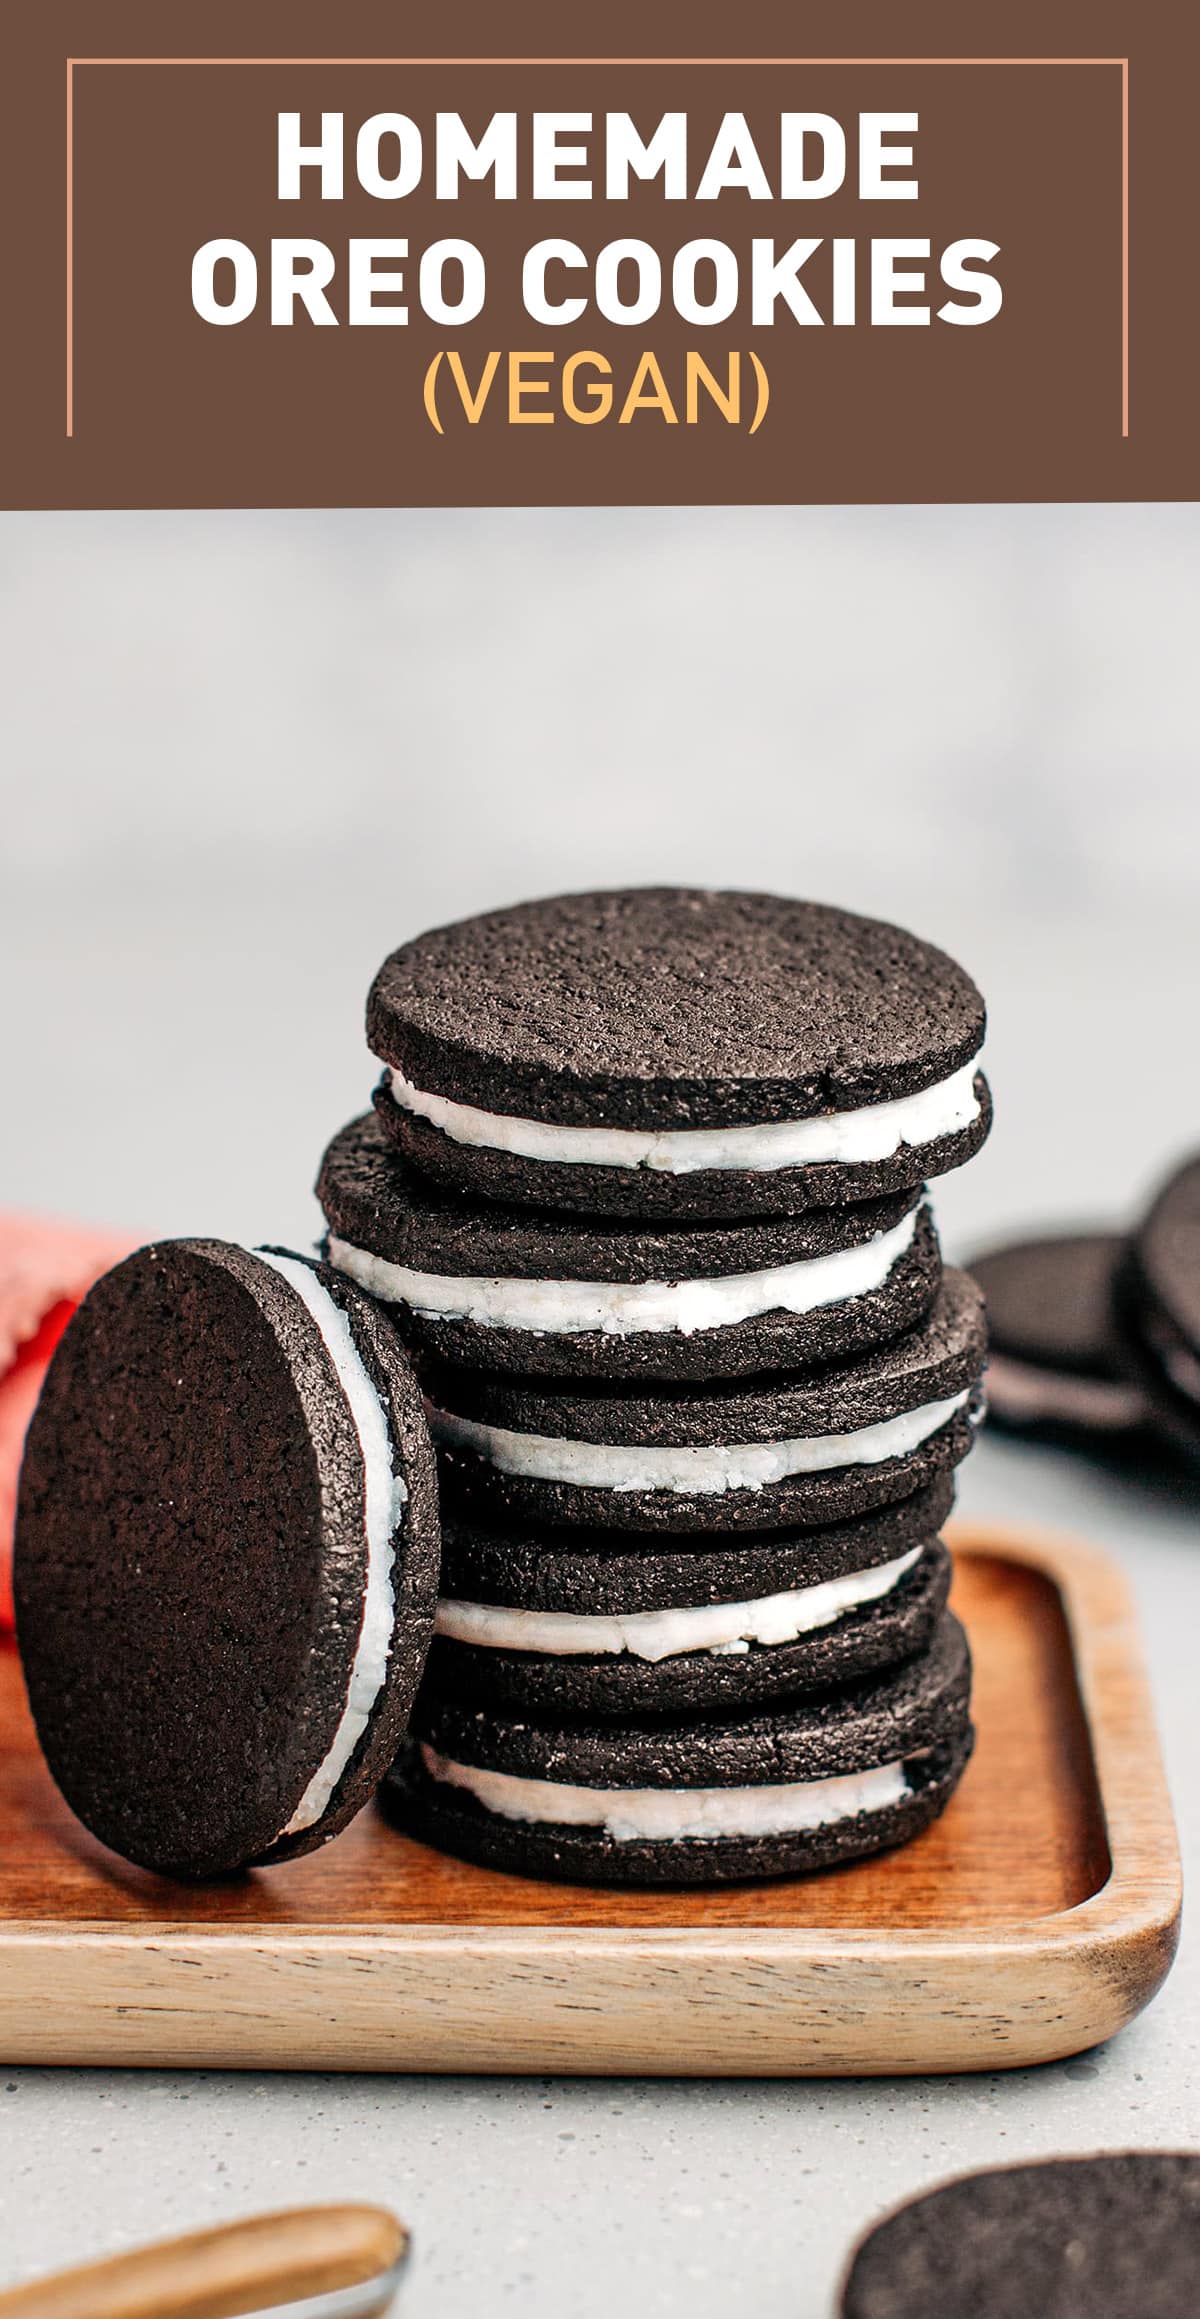 Relive your childhood memories with these homemade Oreo cookies! These school snack classics are simple to prepare, require just a few ingredients, and come out perfectly crispy every time! They are dark and chocolatey and generously filled with sweet vanilla filling! #homemadeoreo #vegancookies #veganbaking